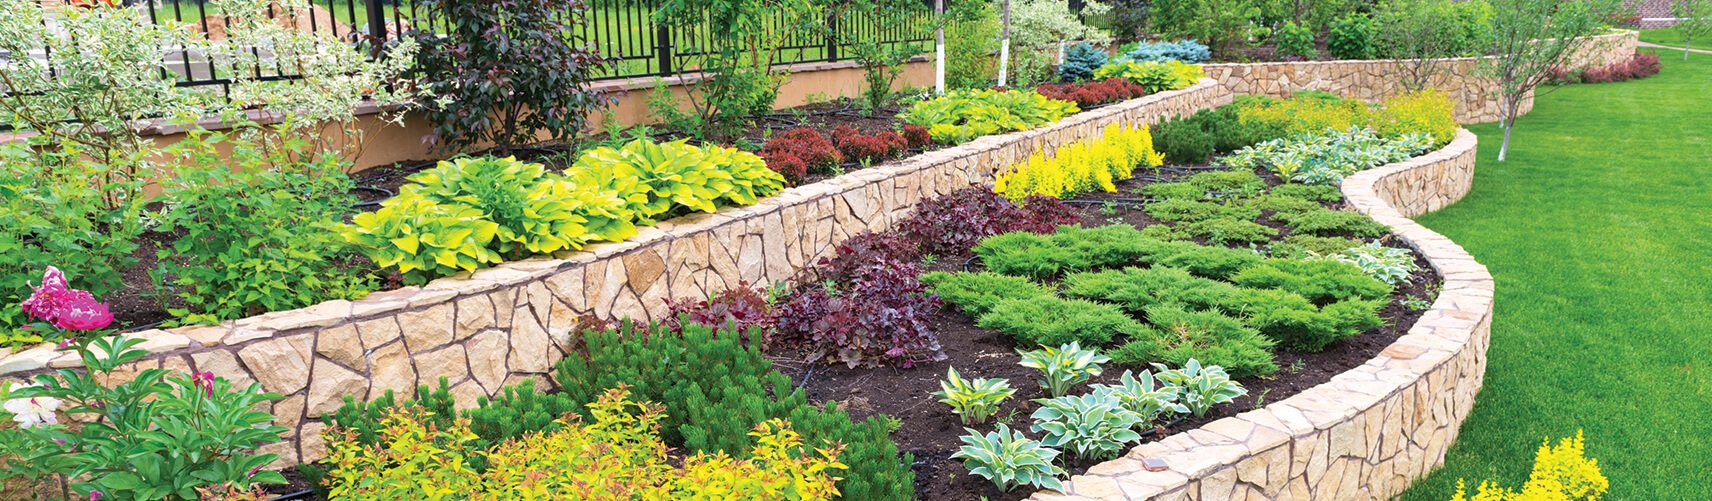 Purcellville Landscape Design, Landscaping Company and Lawn Care Services